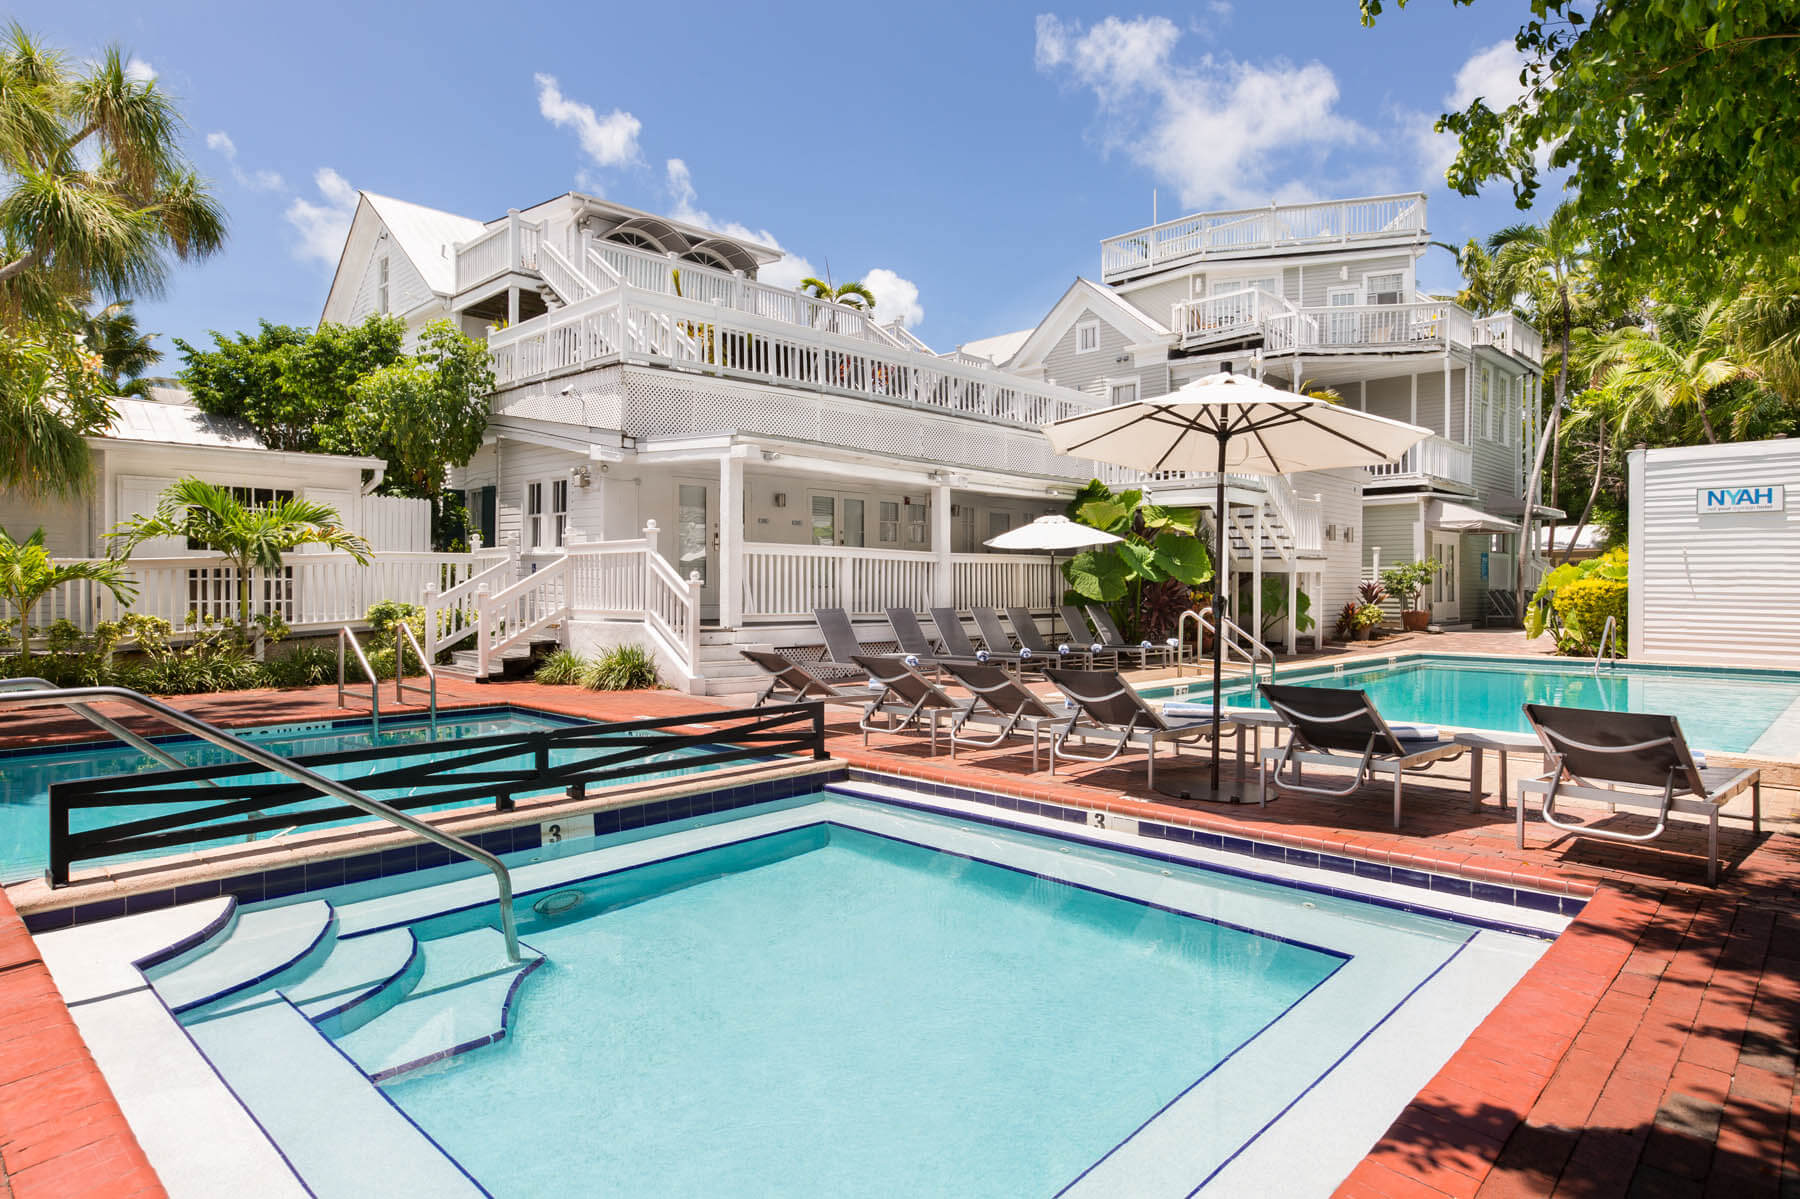 After making the drive from Fort Lauderdale to Key West, relax by the pool